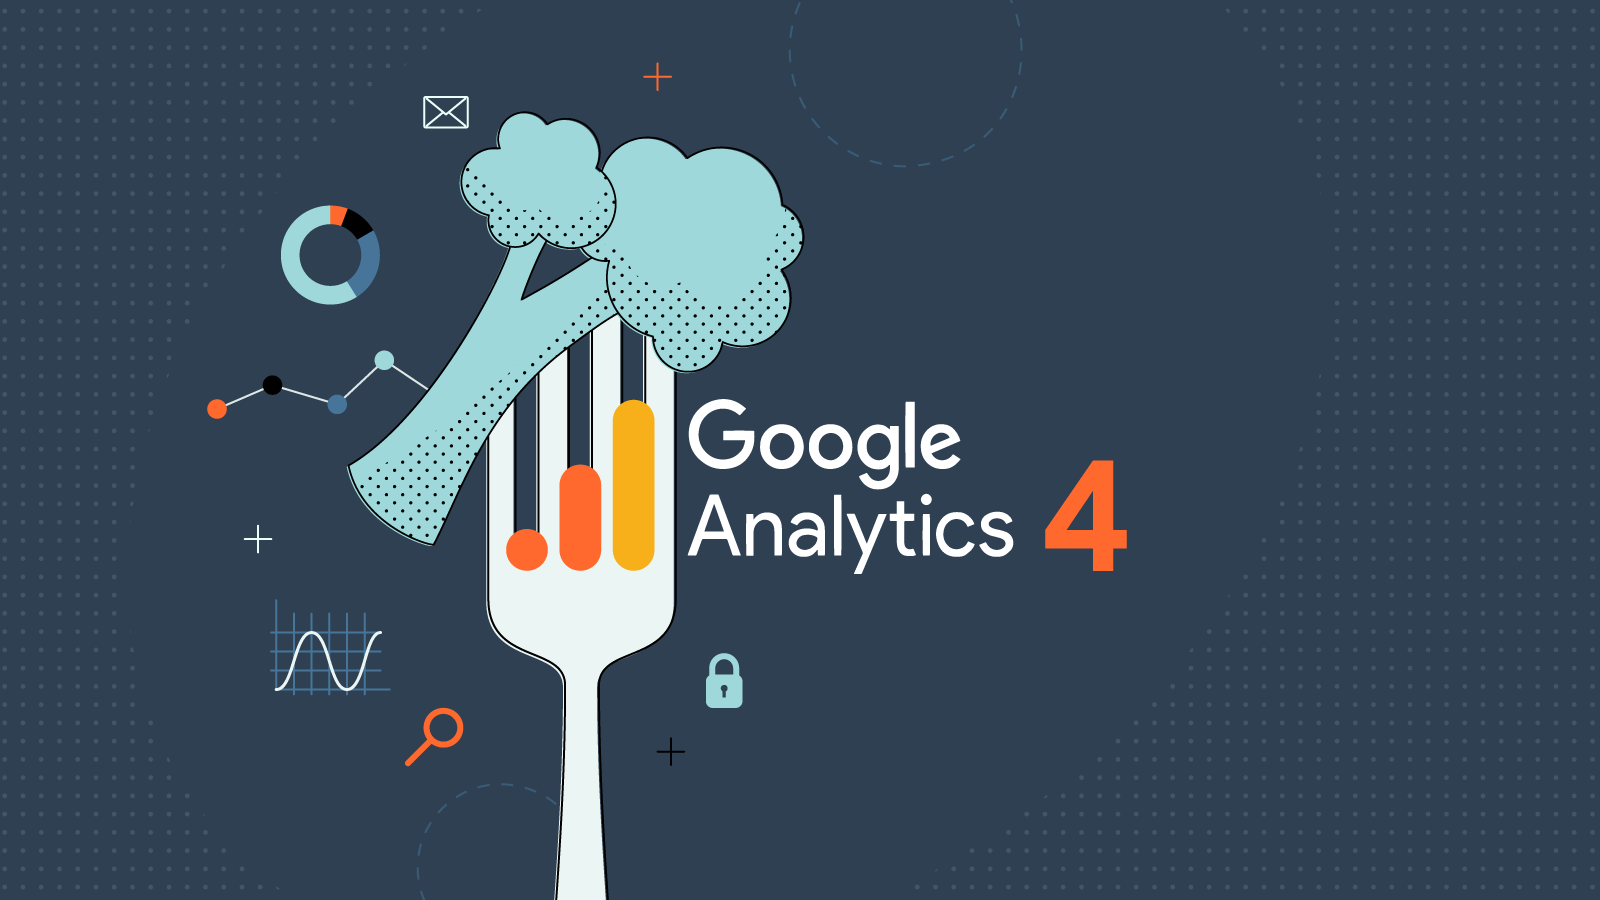 It’s Time to Eat Your Data Driven Vegetables: A “Why Now” Guide to Google Analytics 4